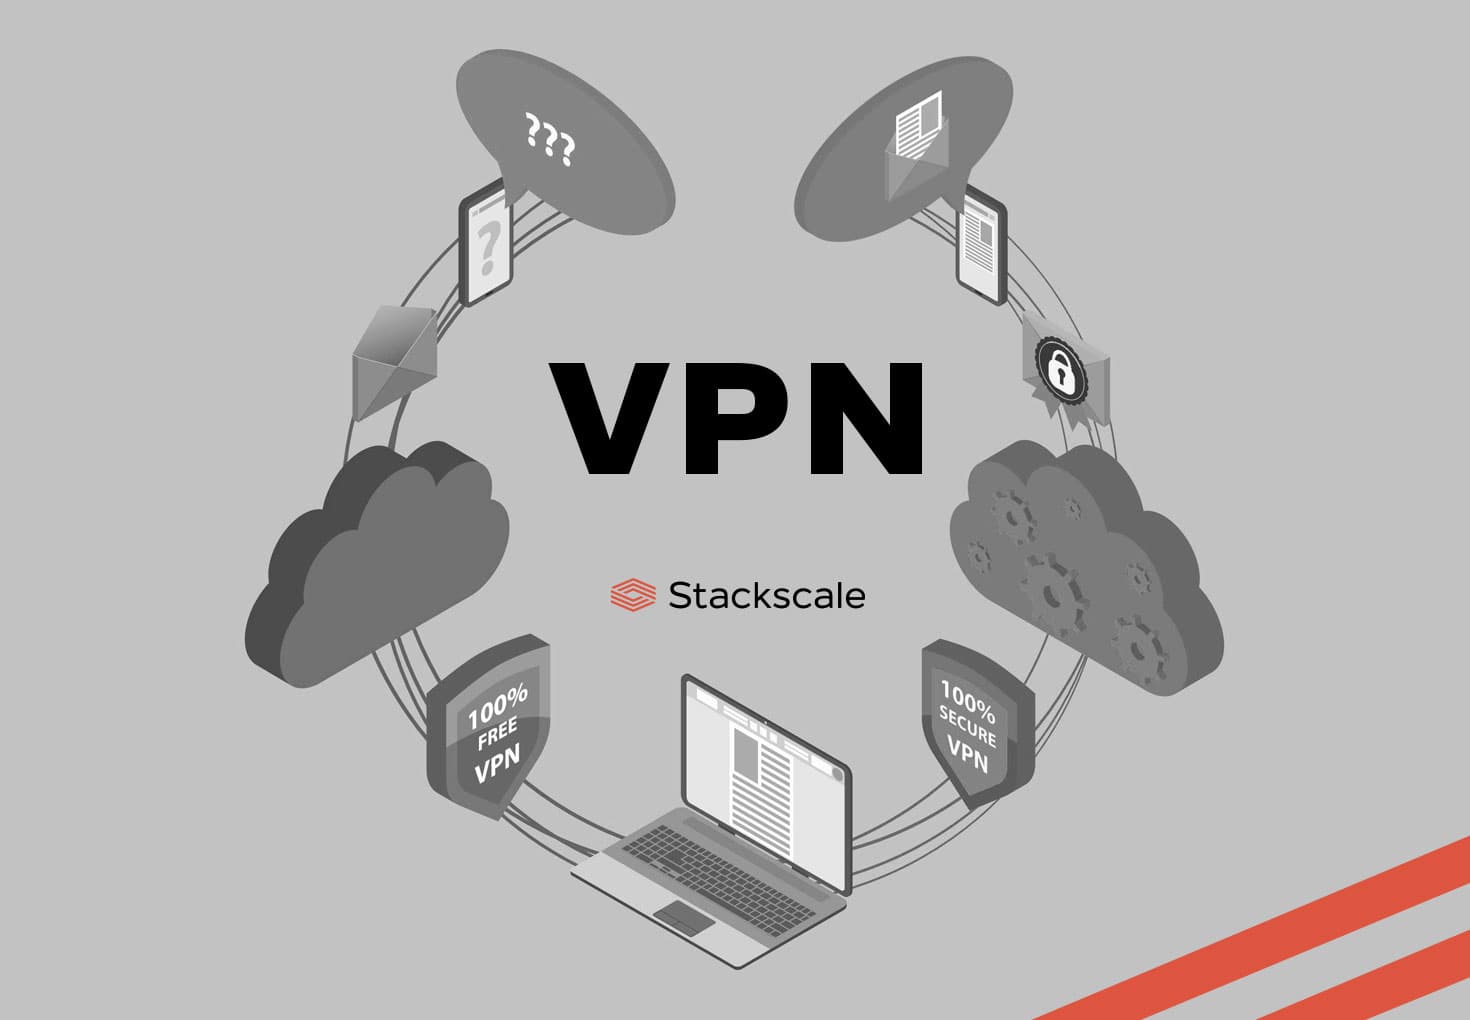 VPN: how does it work and what is it used for?